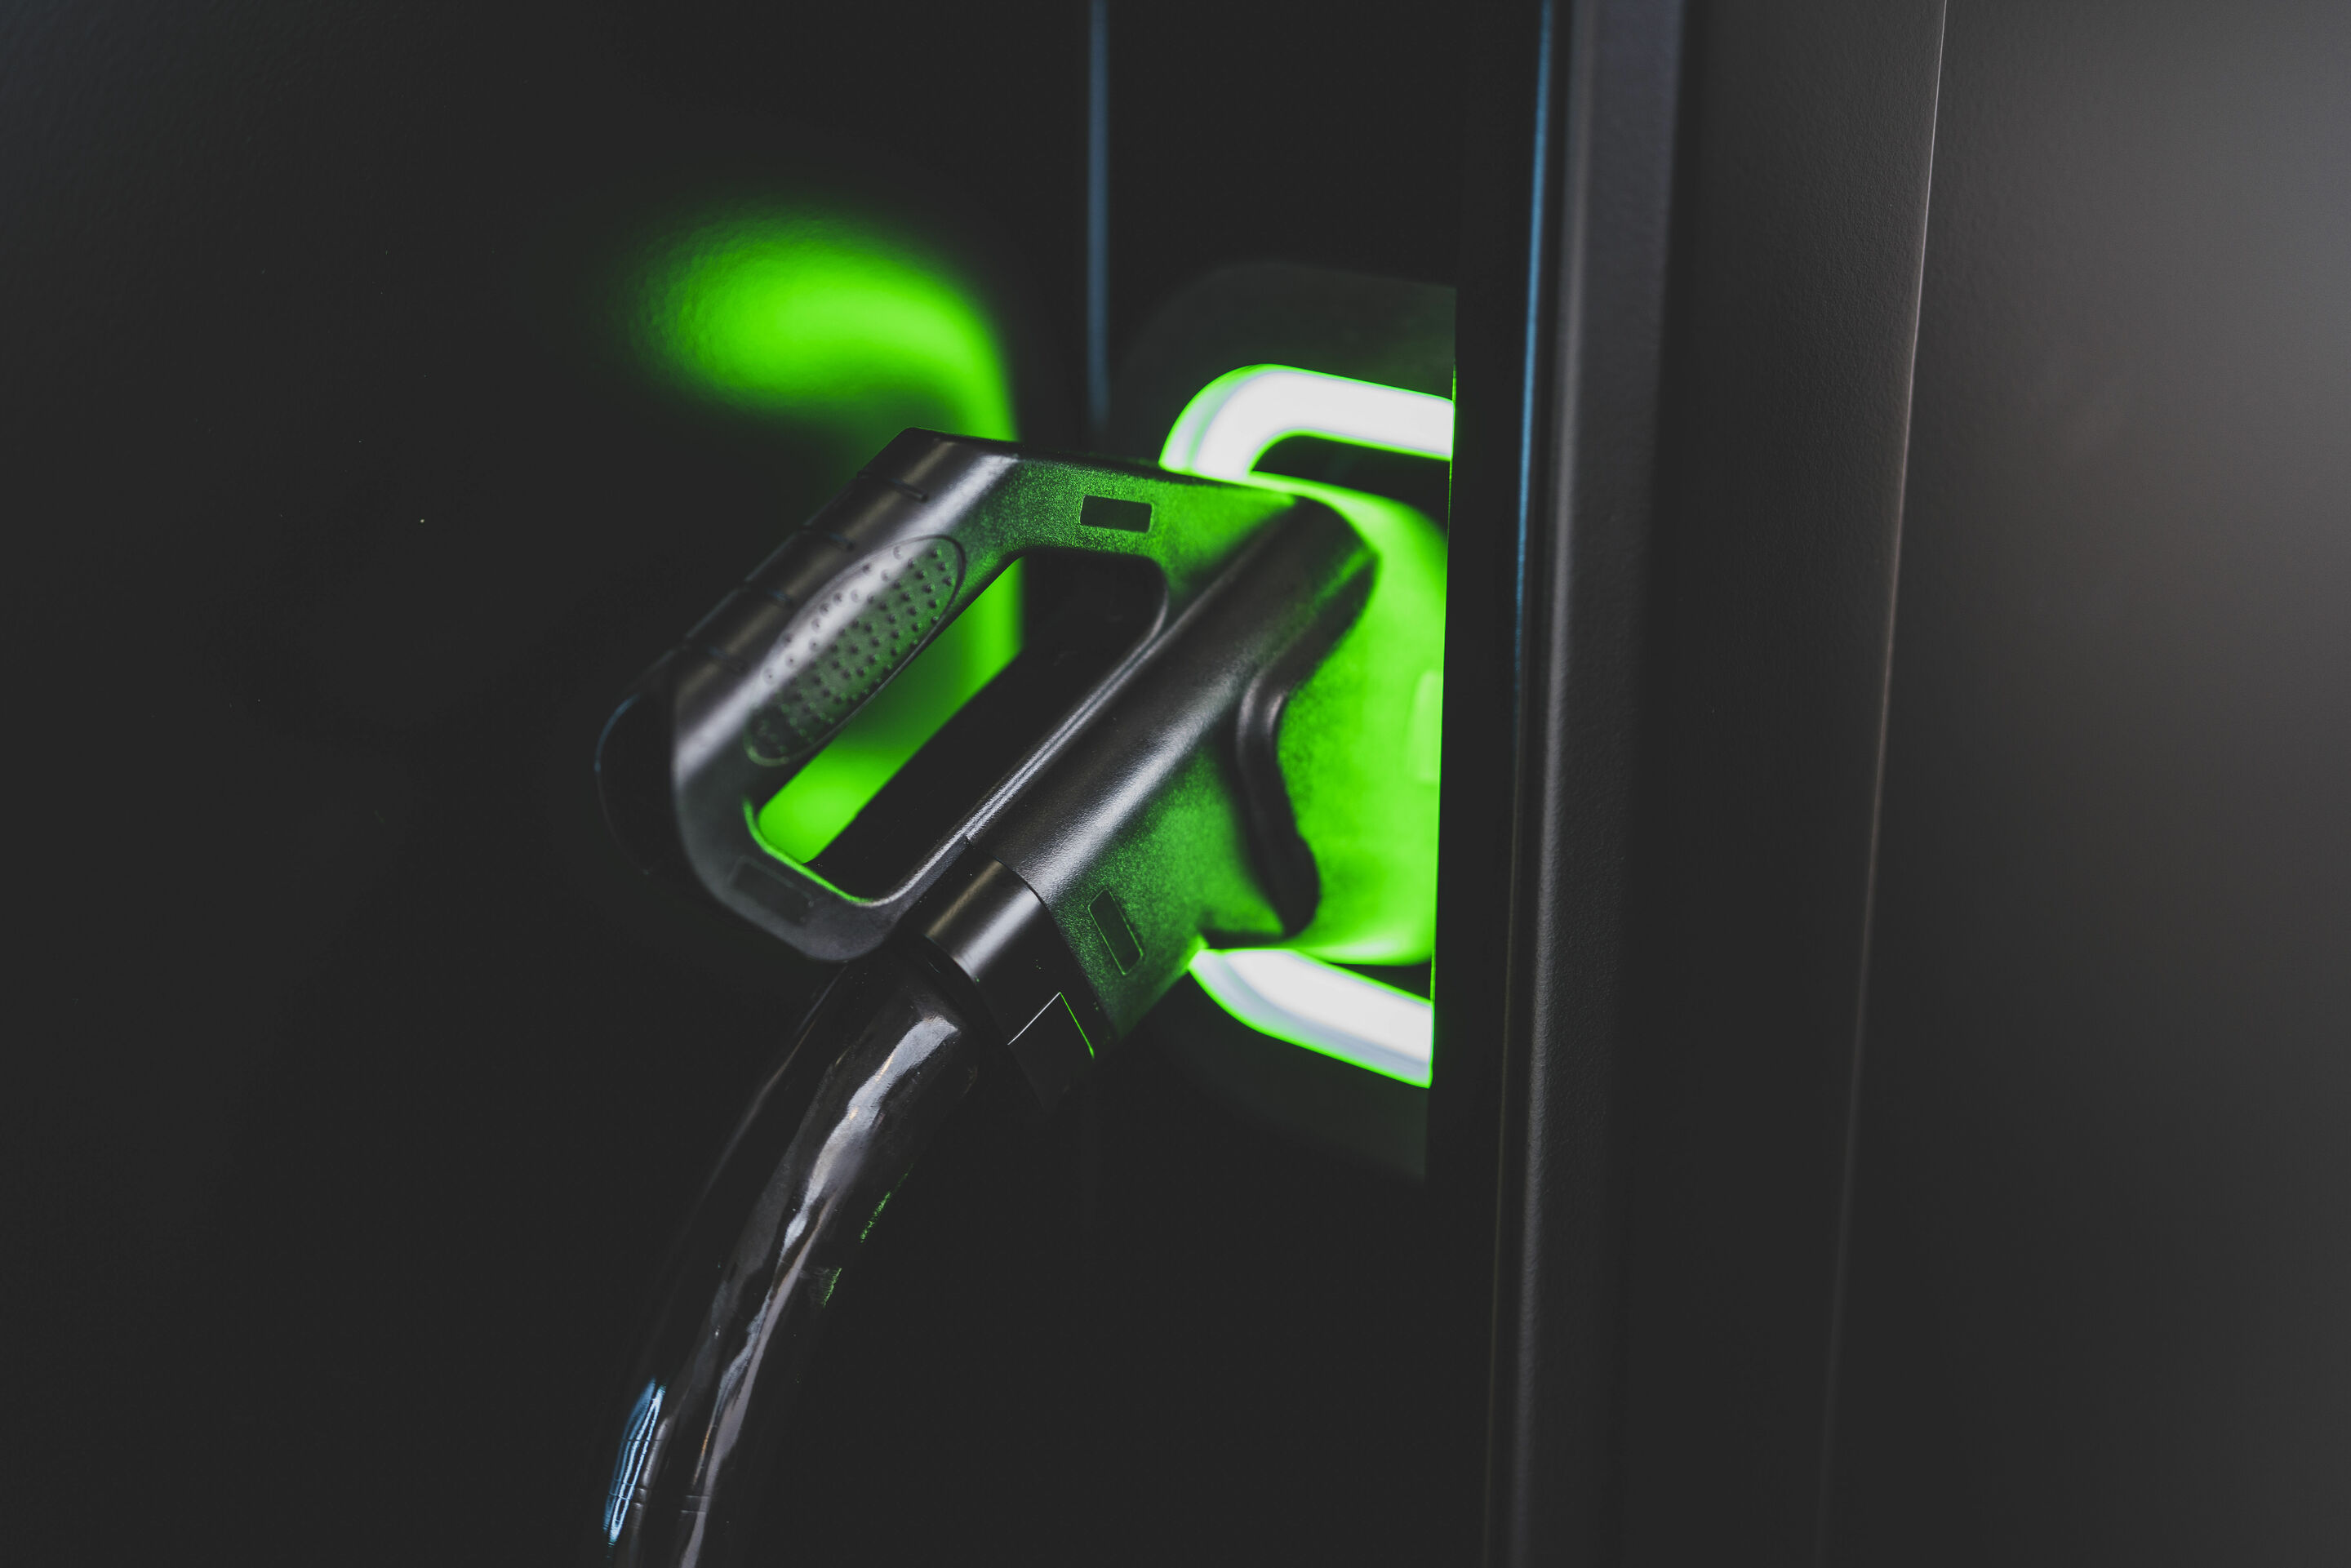 World first: start of the Audi charging hub as an urban quick-charing concept